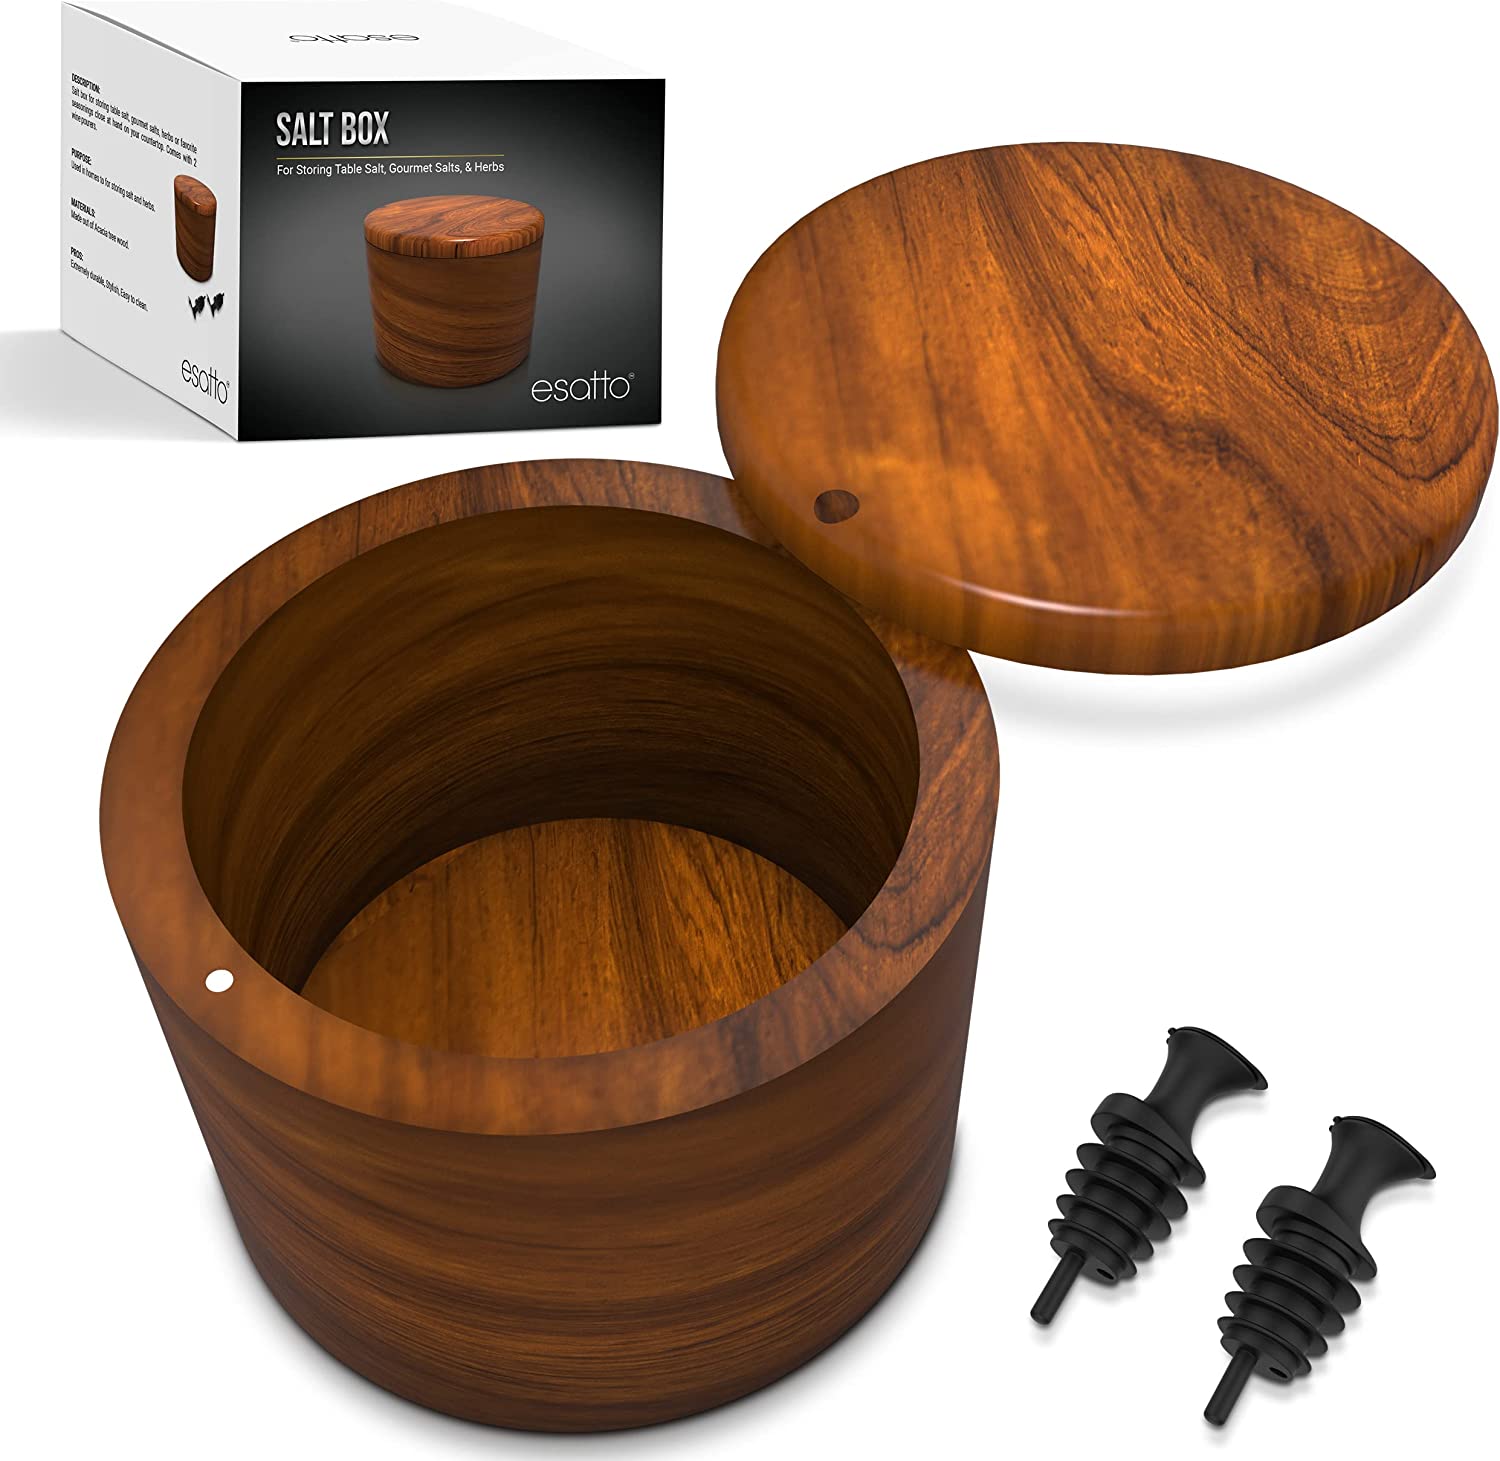 Esatto Round Acacia Wooden Salt Box, Magnetic Swivel Lid, Salt pepper or Spice Storage Box, 2 Wine Pourers Included